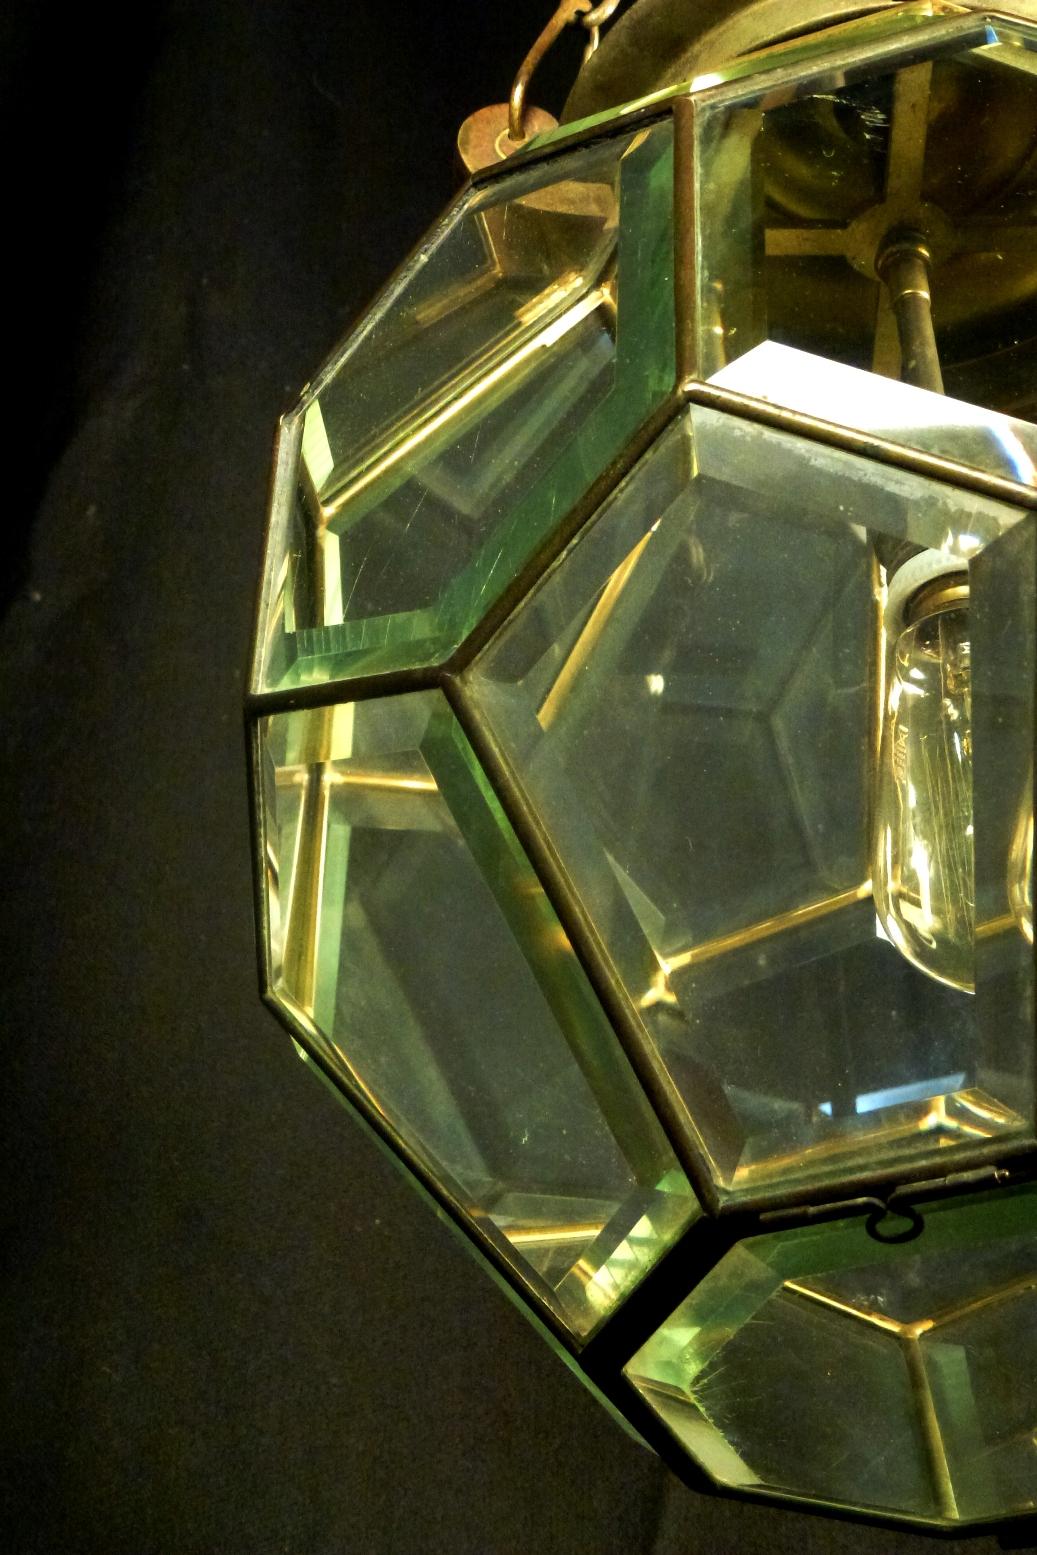 Pentagon Beveled Glass Geometric Ceiling Light in Adolf Loos Style, Early 1900s For Sale 8